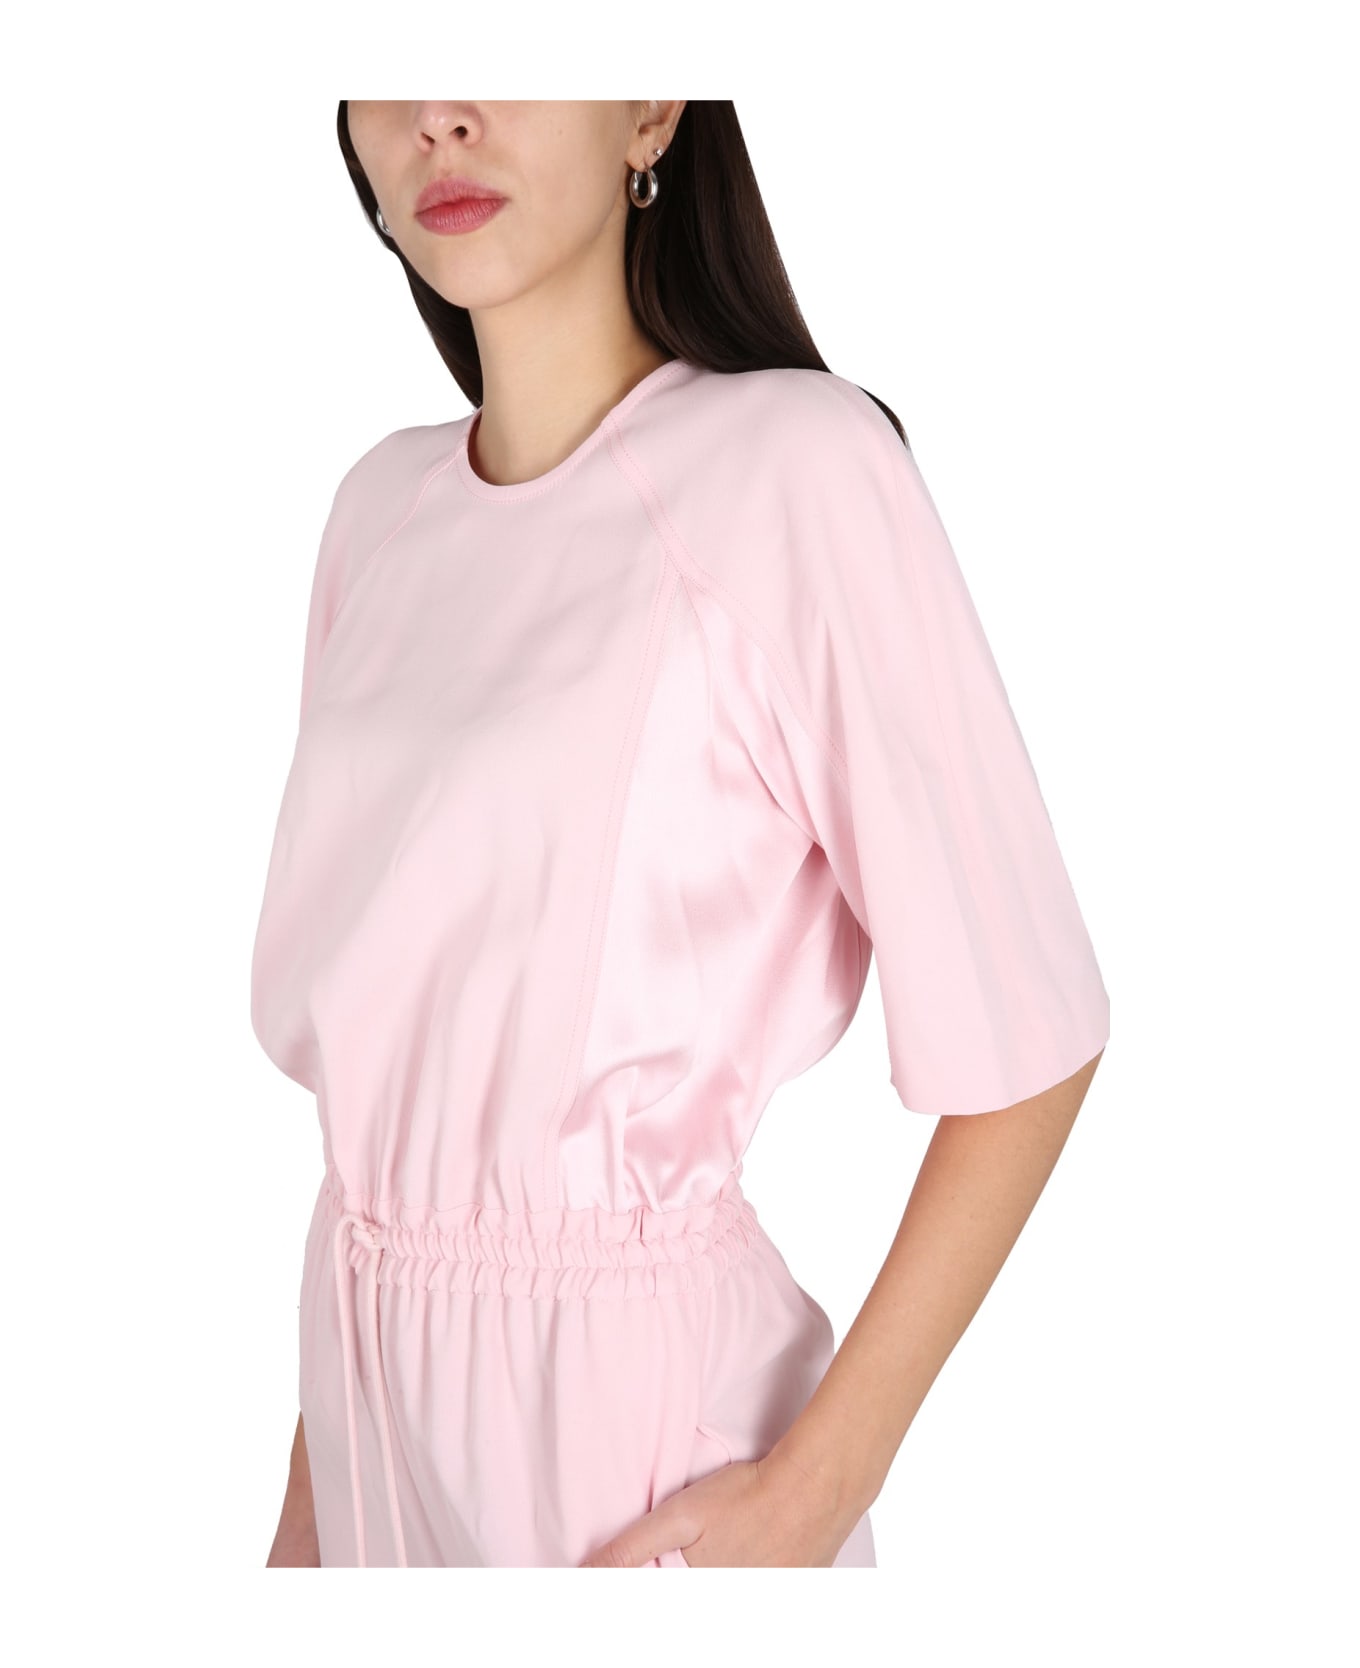 Boutique Moschino Sport Chic Jumpsuit - ROSA